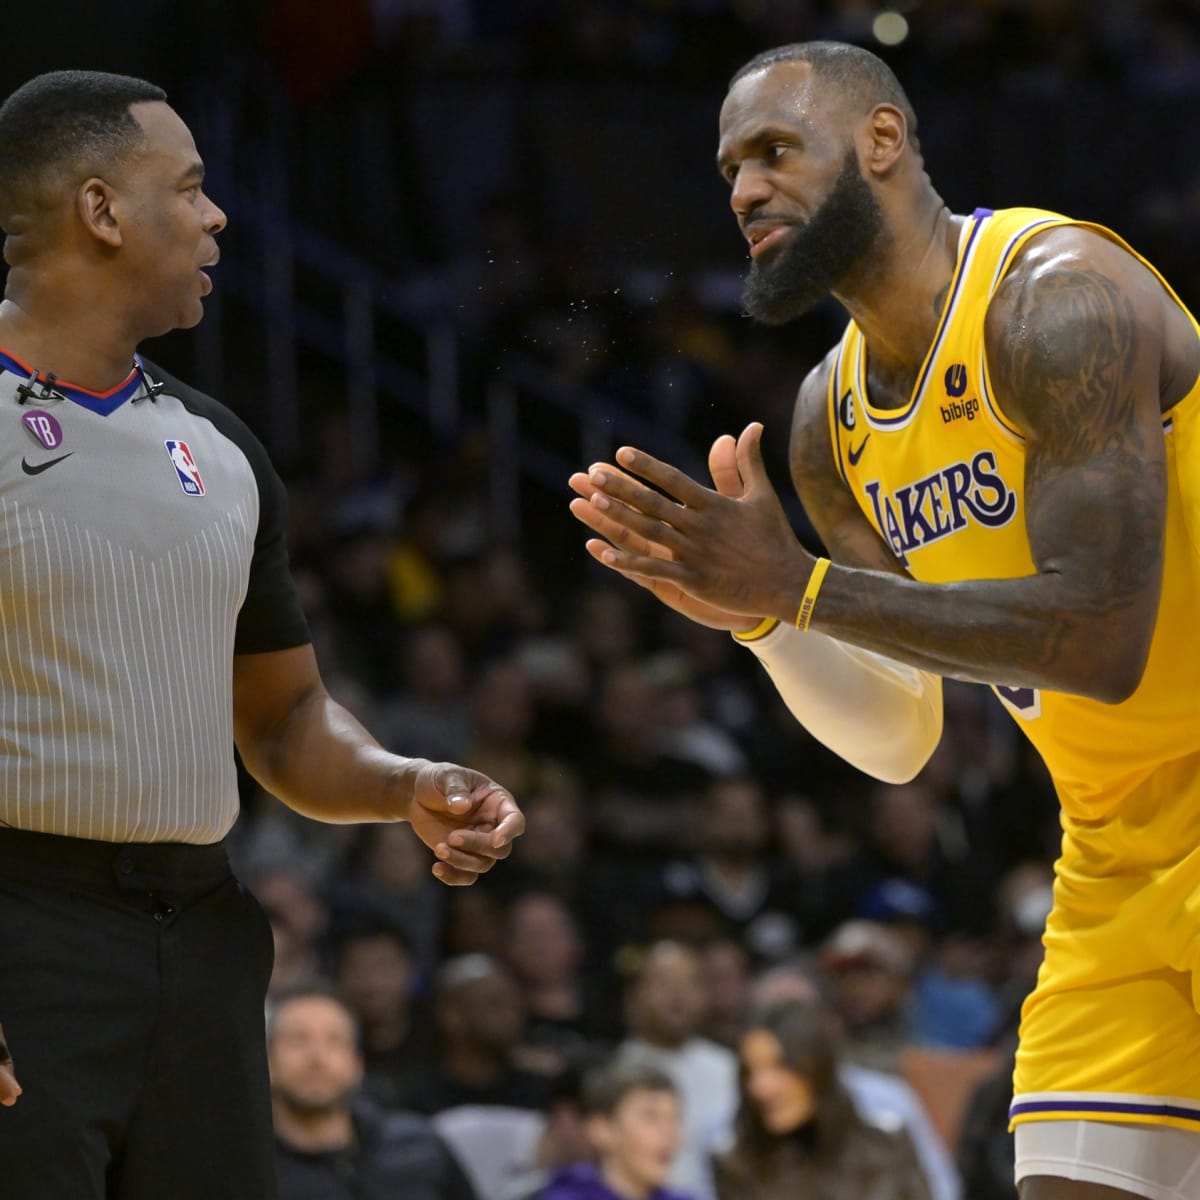 Lakers Injury Update: LeBron James' Rehab Is 'Going According To Plan